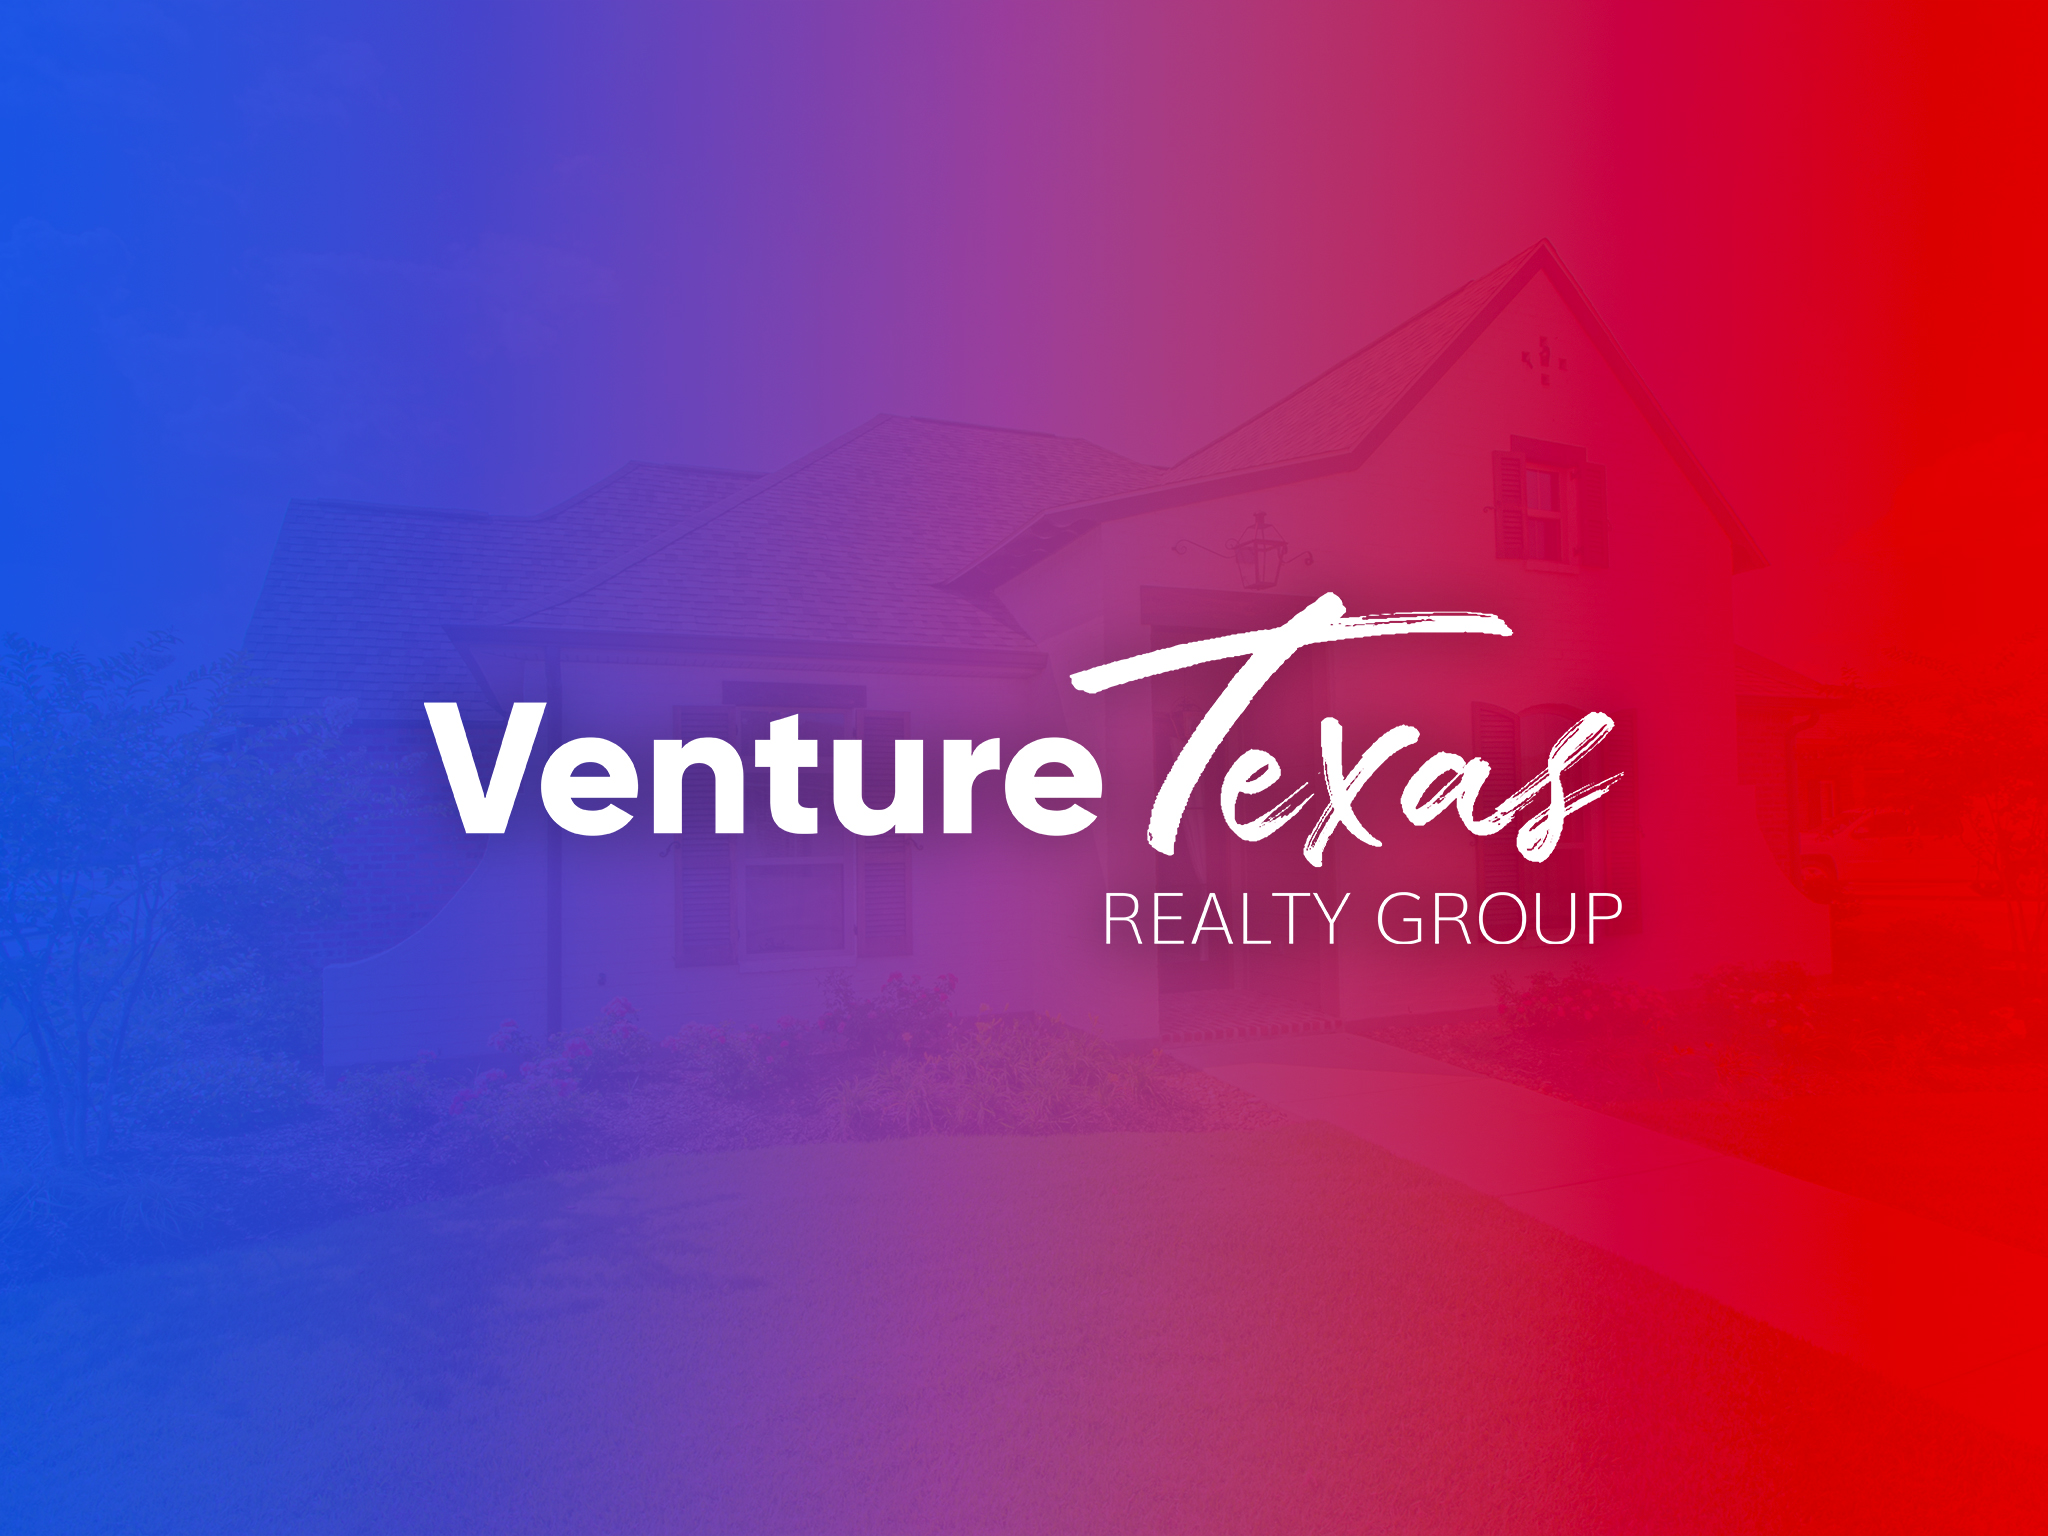 Venture Texas Realty Group